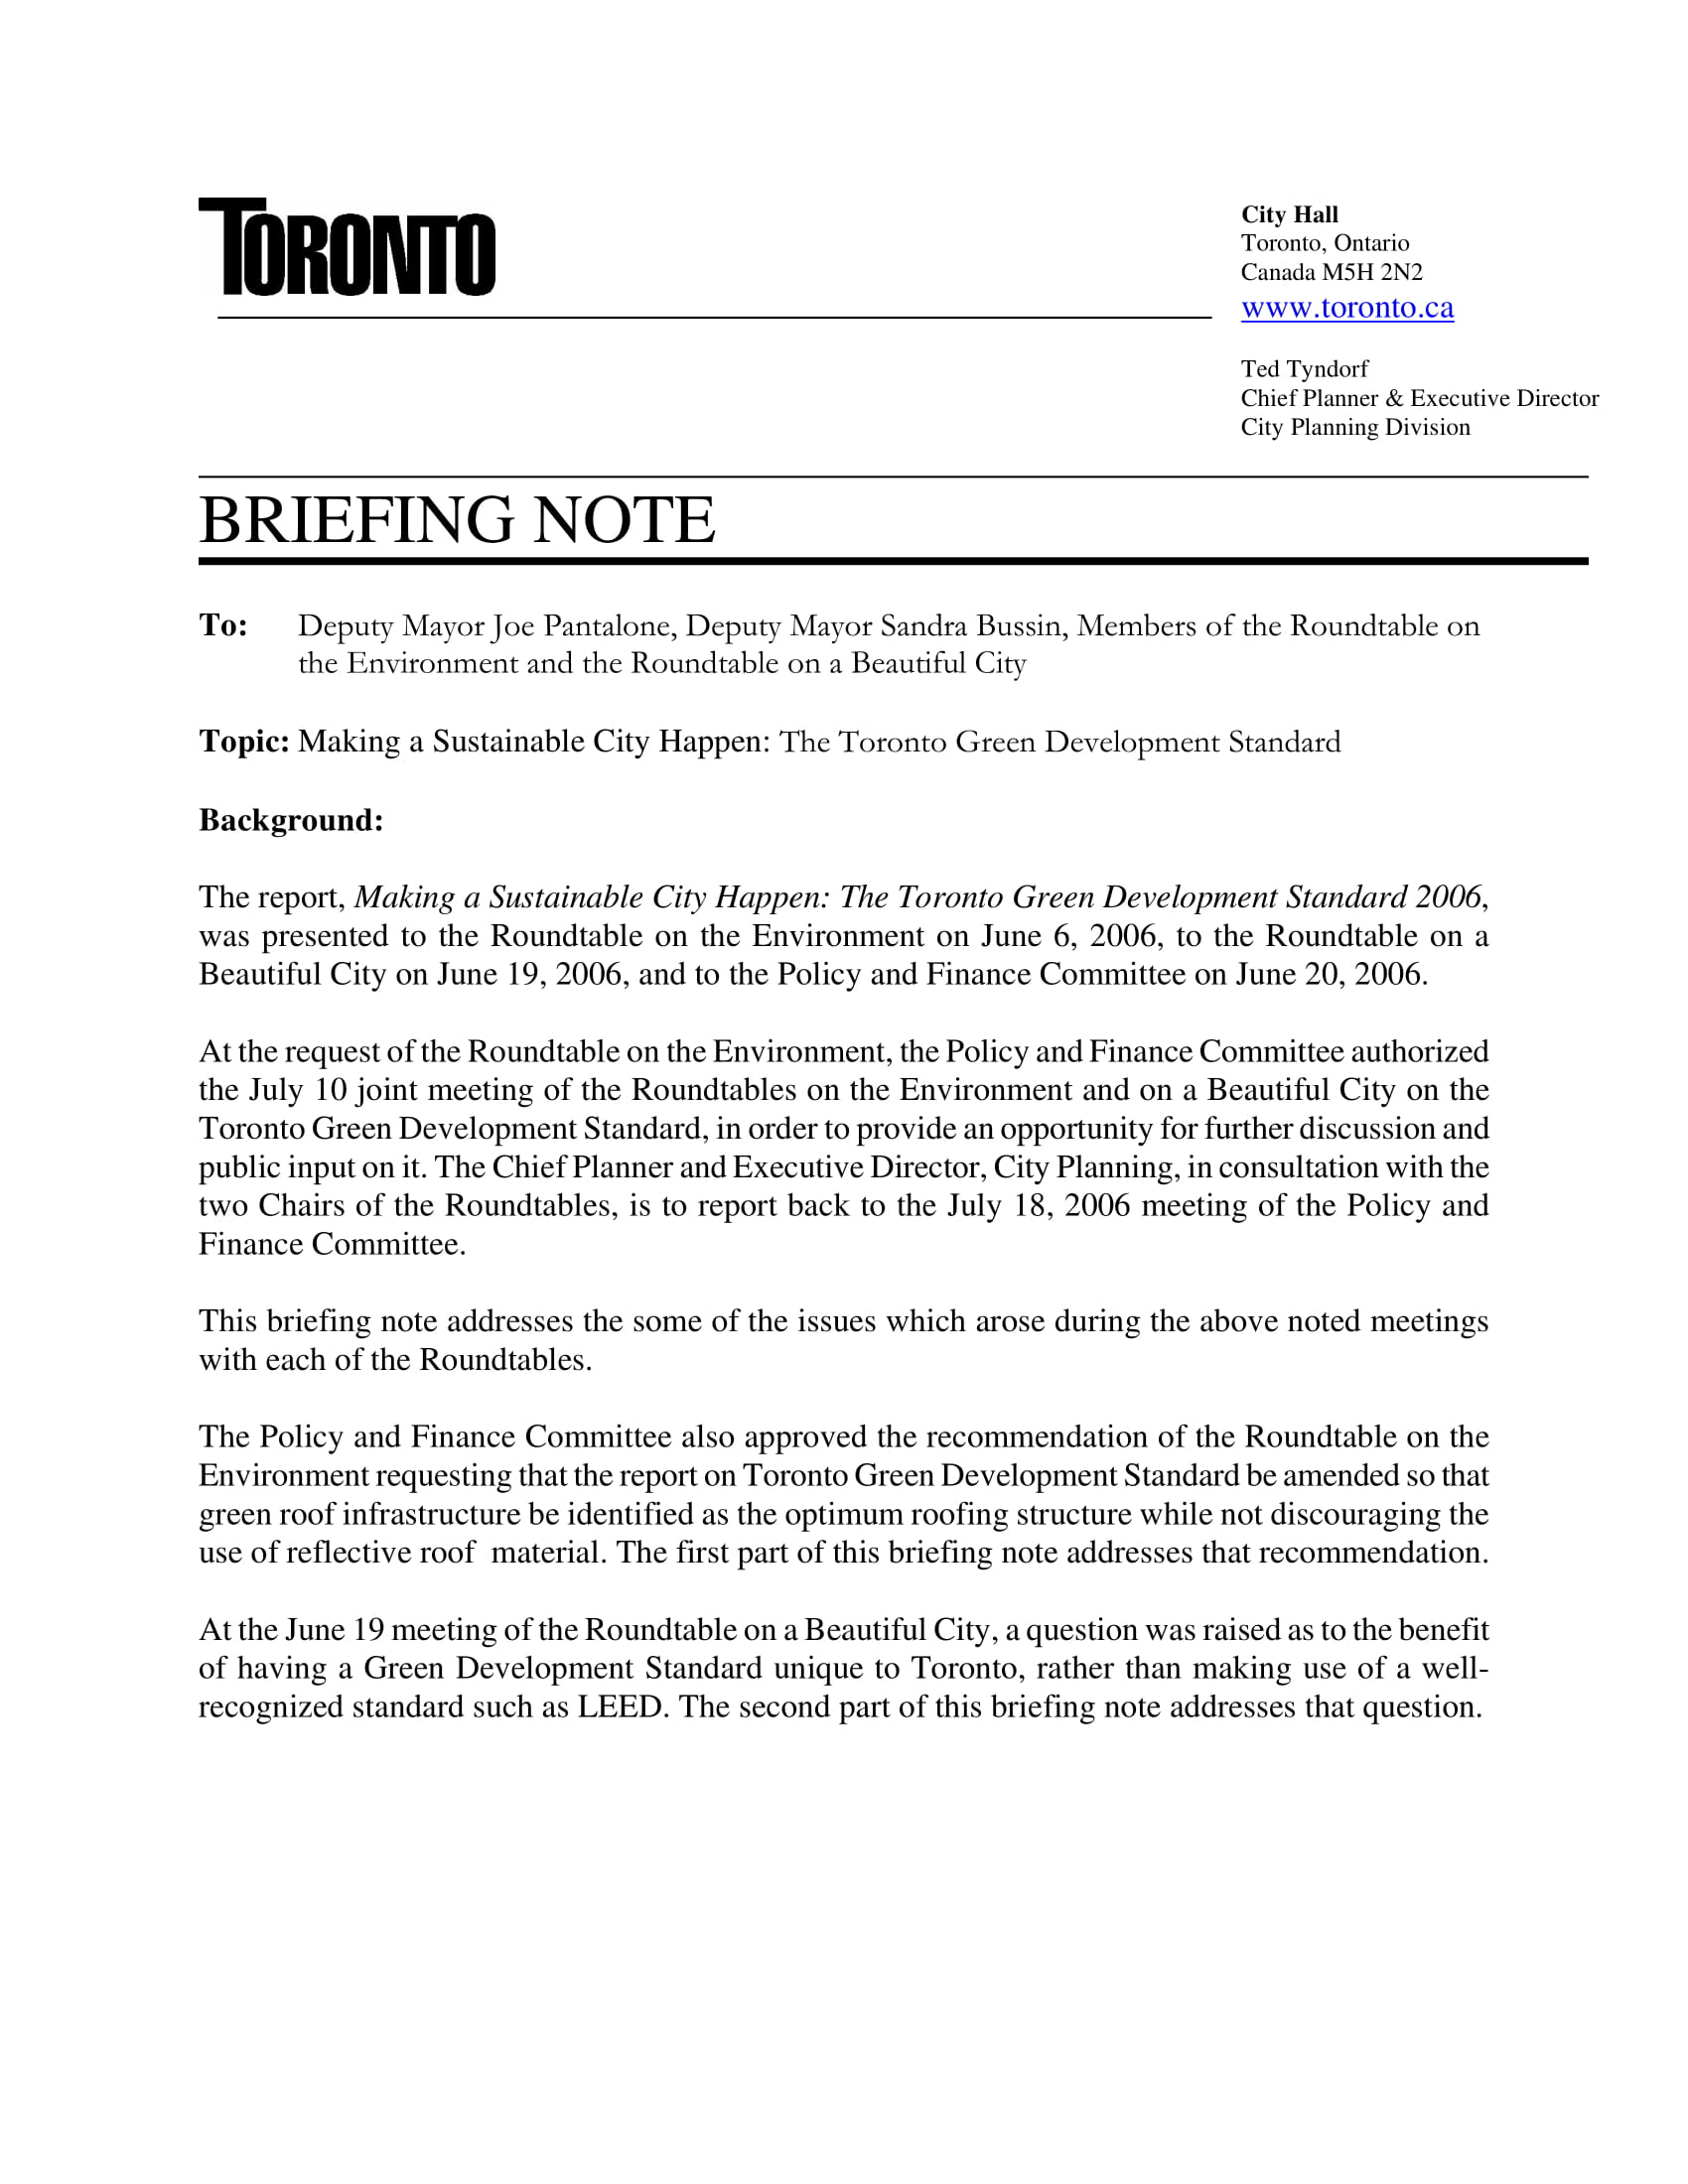 9 Briefing Note Examples Pdf Examples within proportions 1700 X 2200